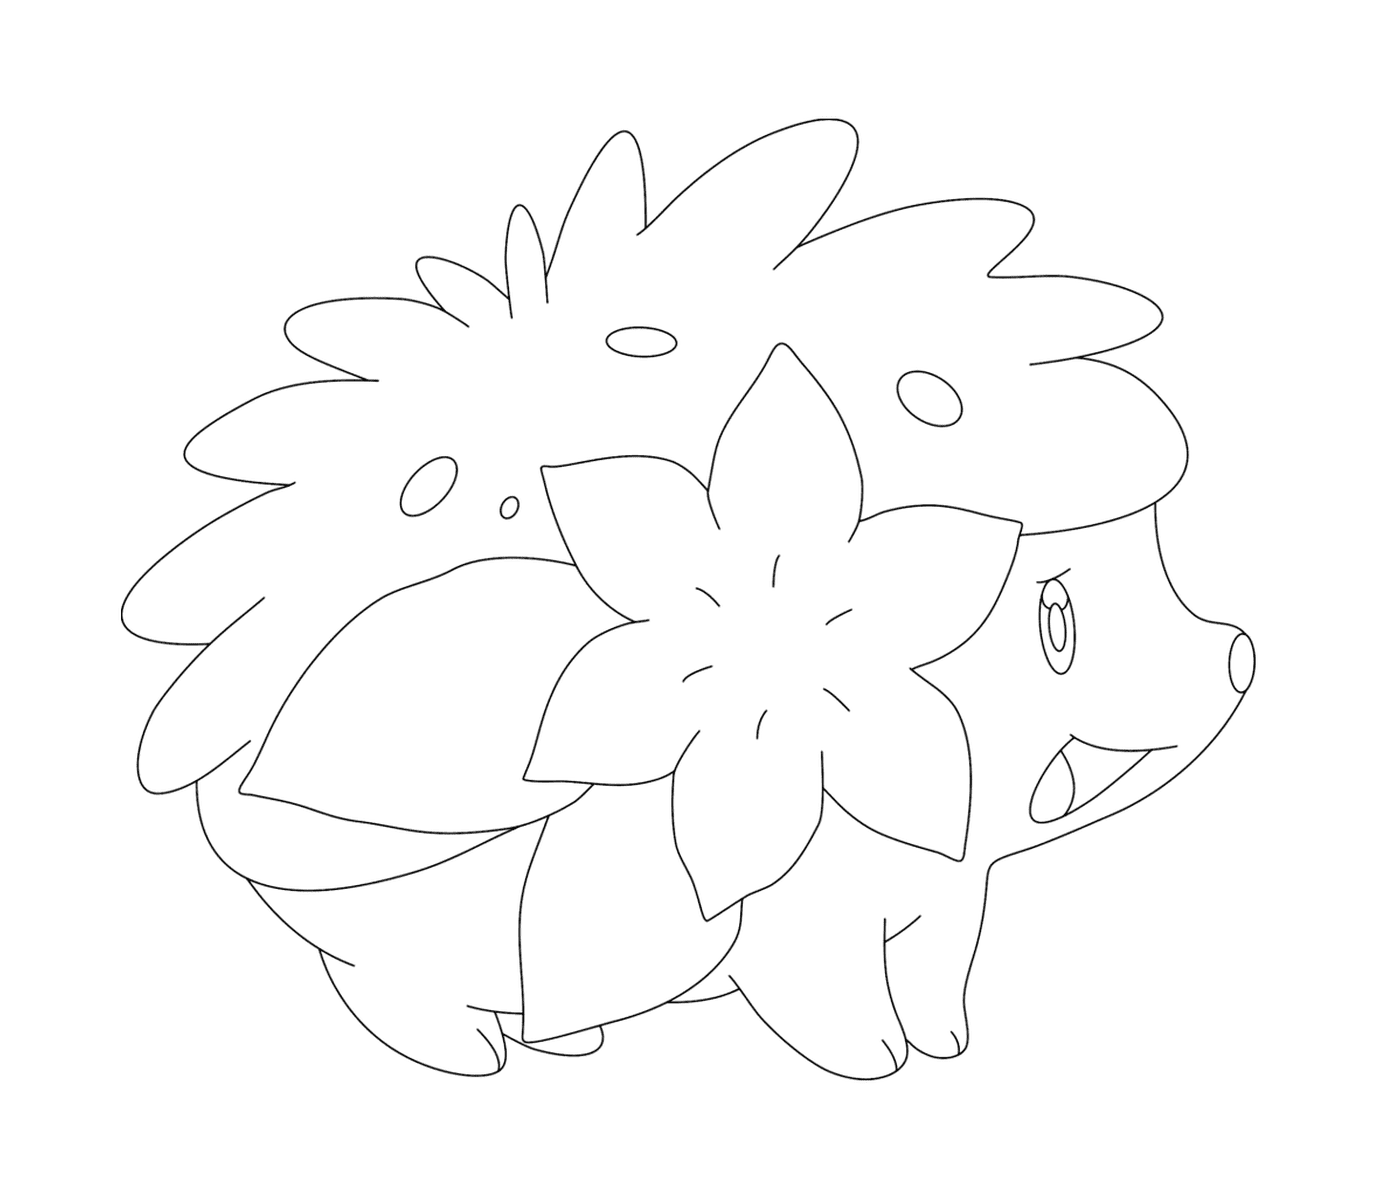  Shaymin in its natural flower form 